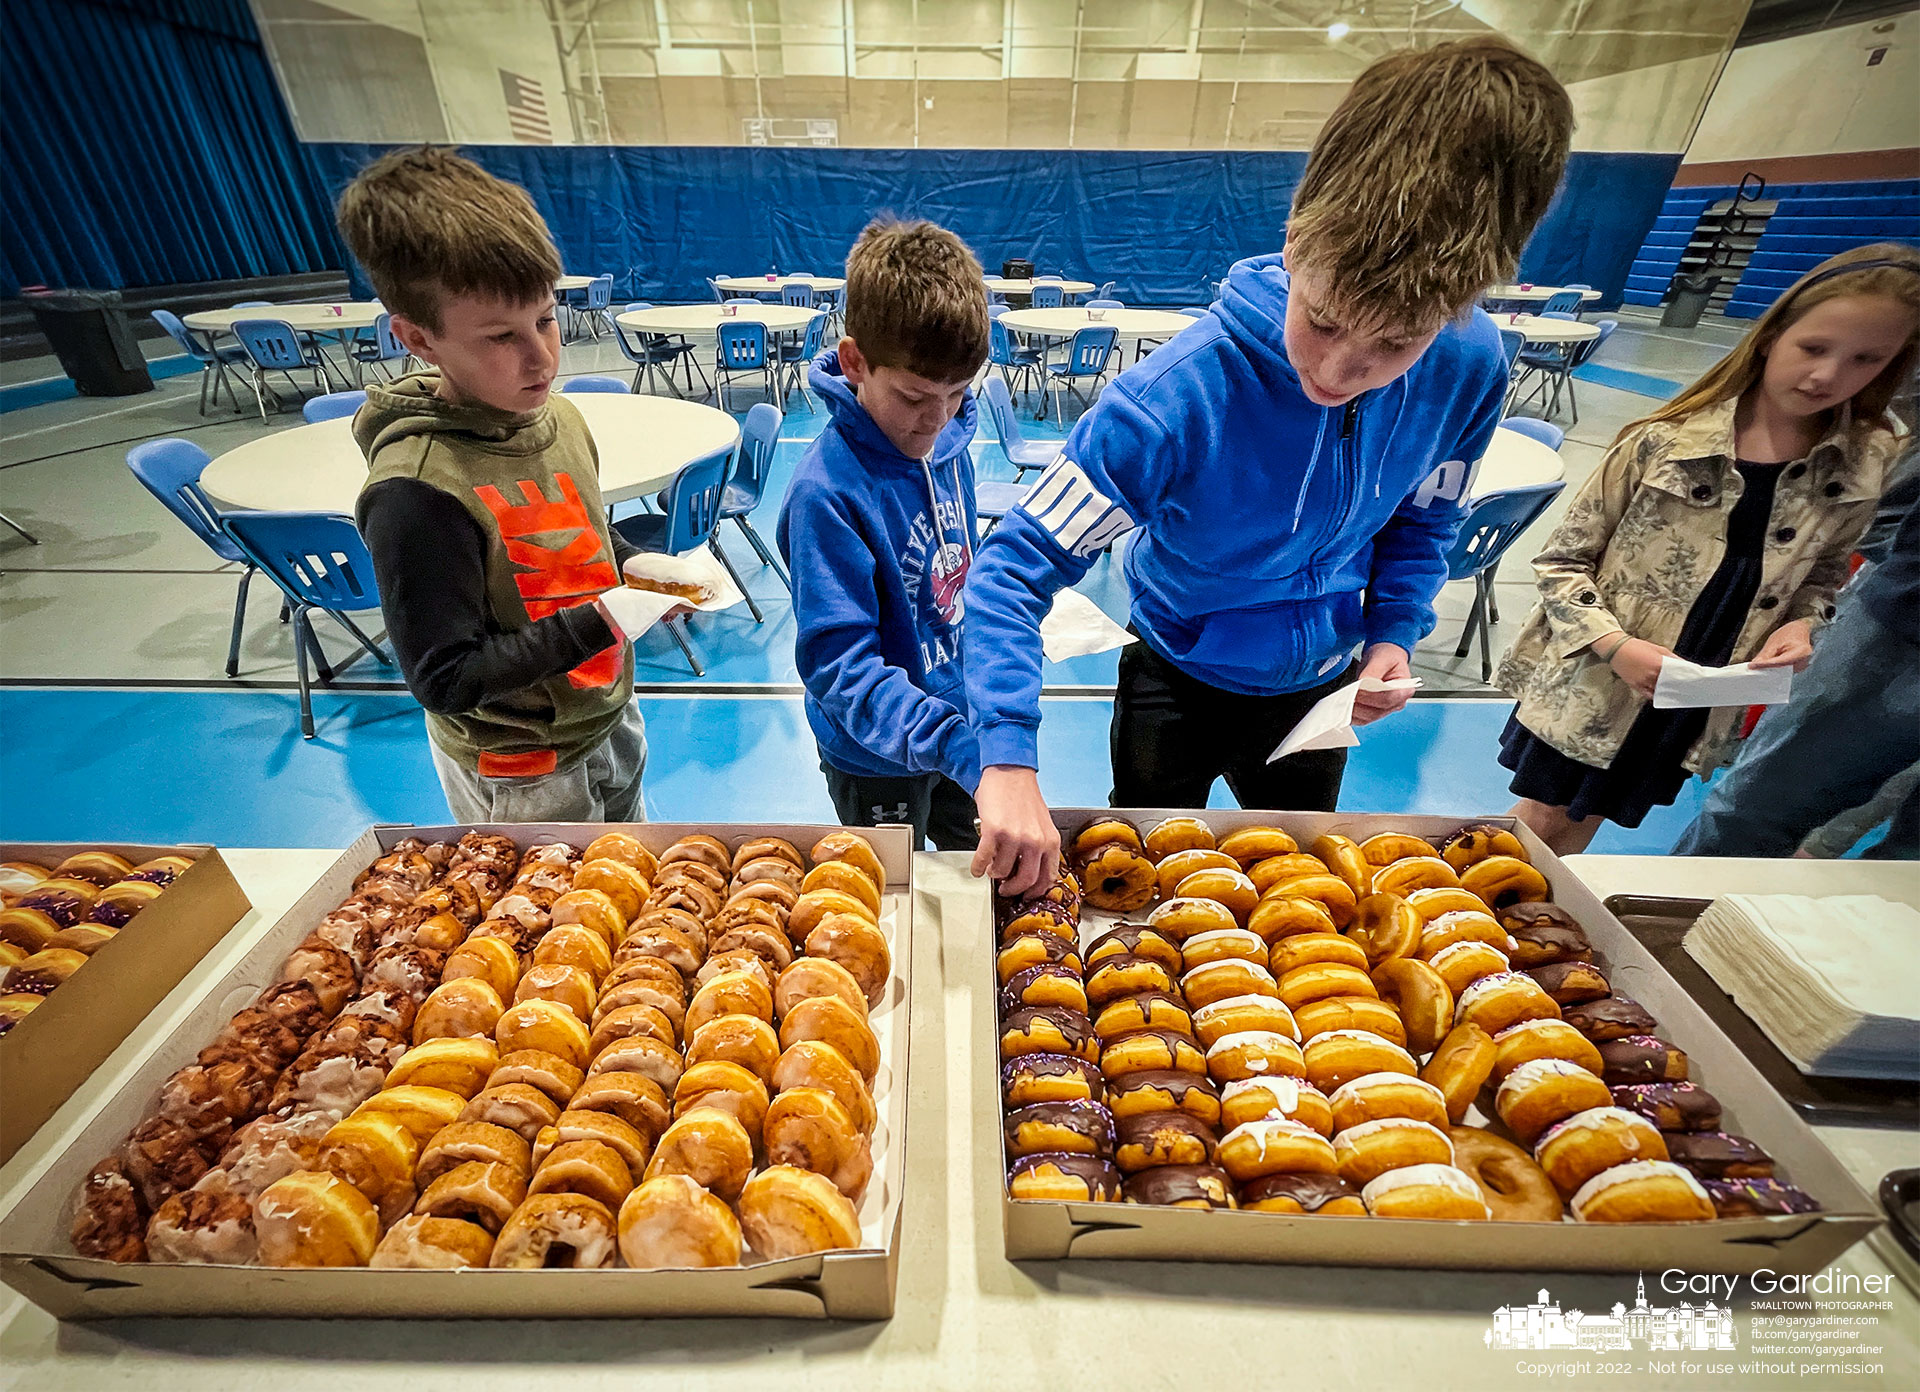 Eager children are the first in line to make their choice from the hundreds of doughnuts offered at the first Sunday doughnuts and coffee at St. Paul the Apostle Catholic Church for two years when social gatherings were limited because of the covid epidemic. My Final Photo for March 27, 2022.